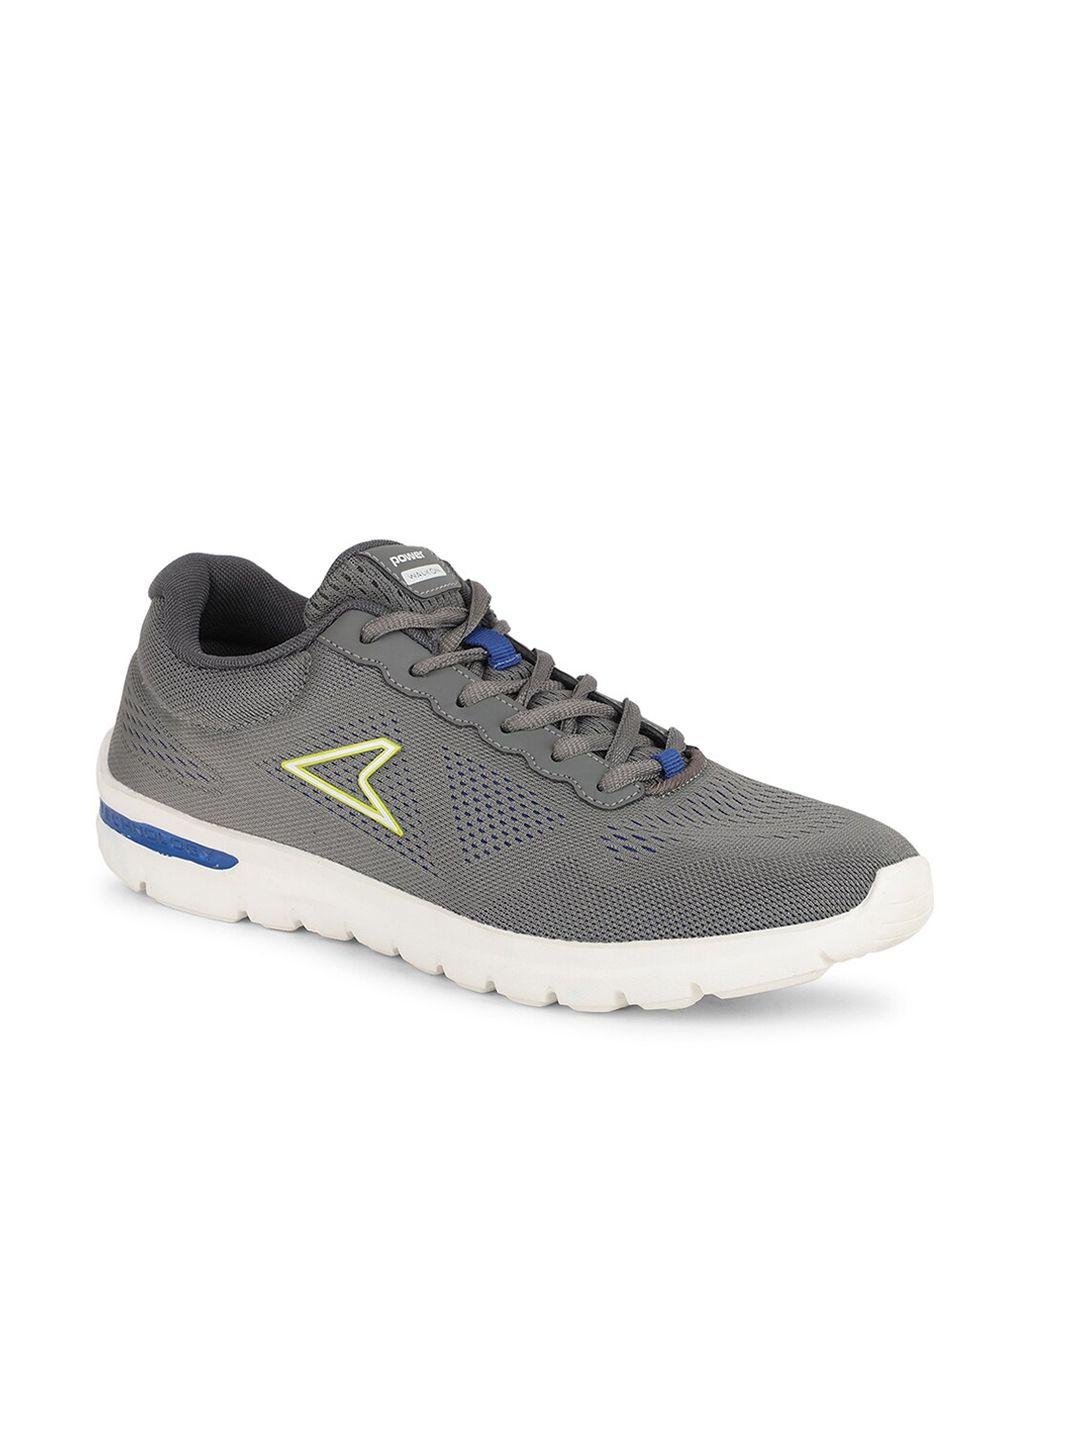 power men grey textile training or gym non-marking shoes